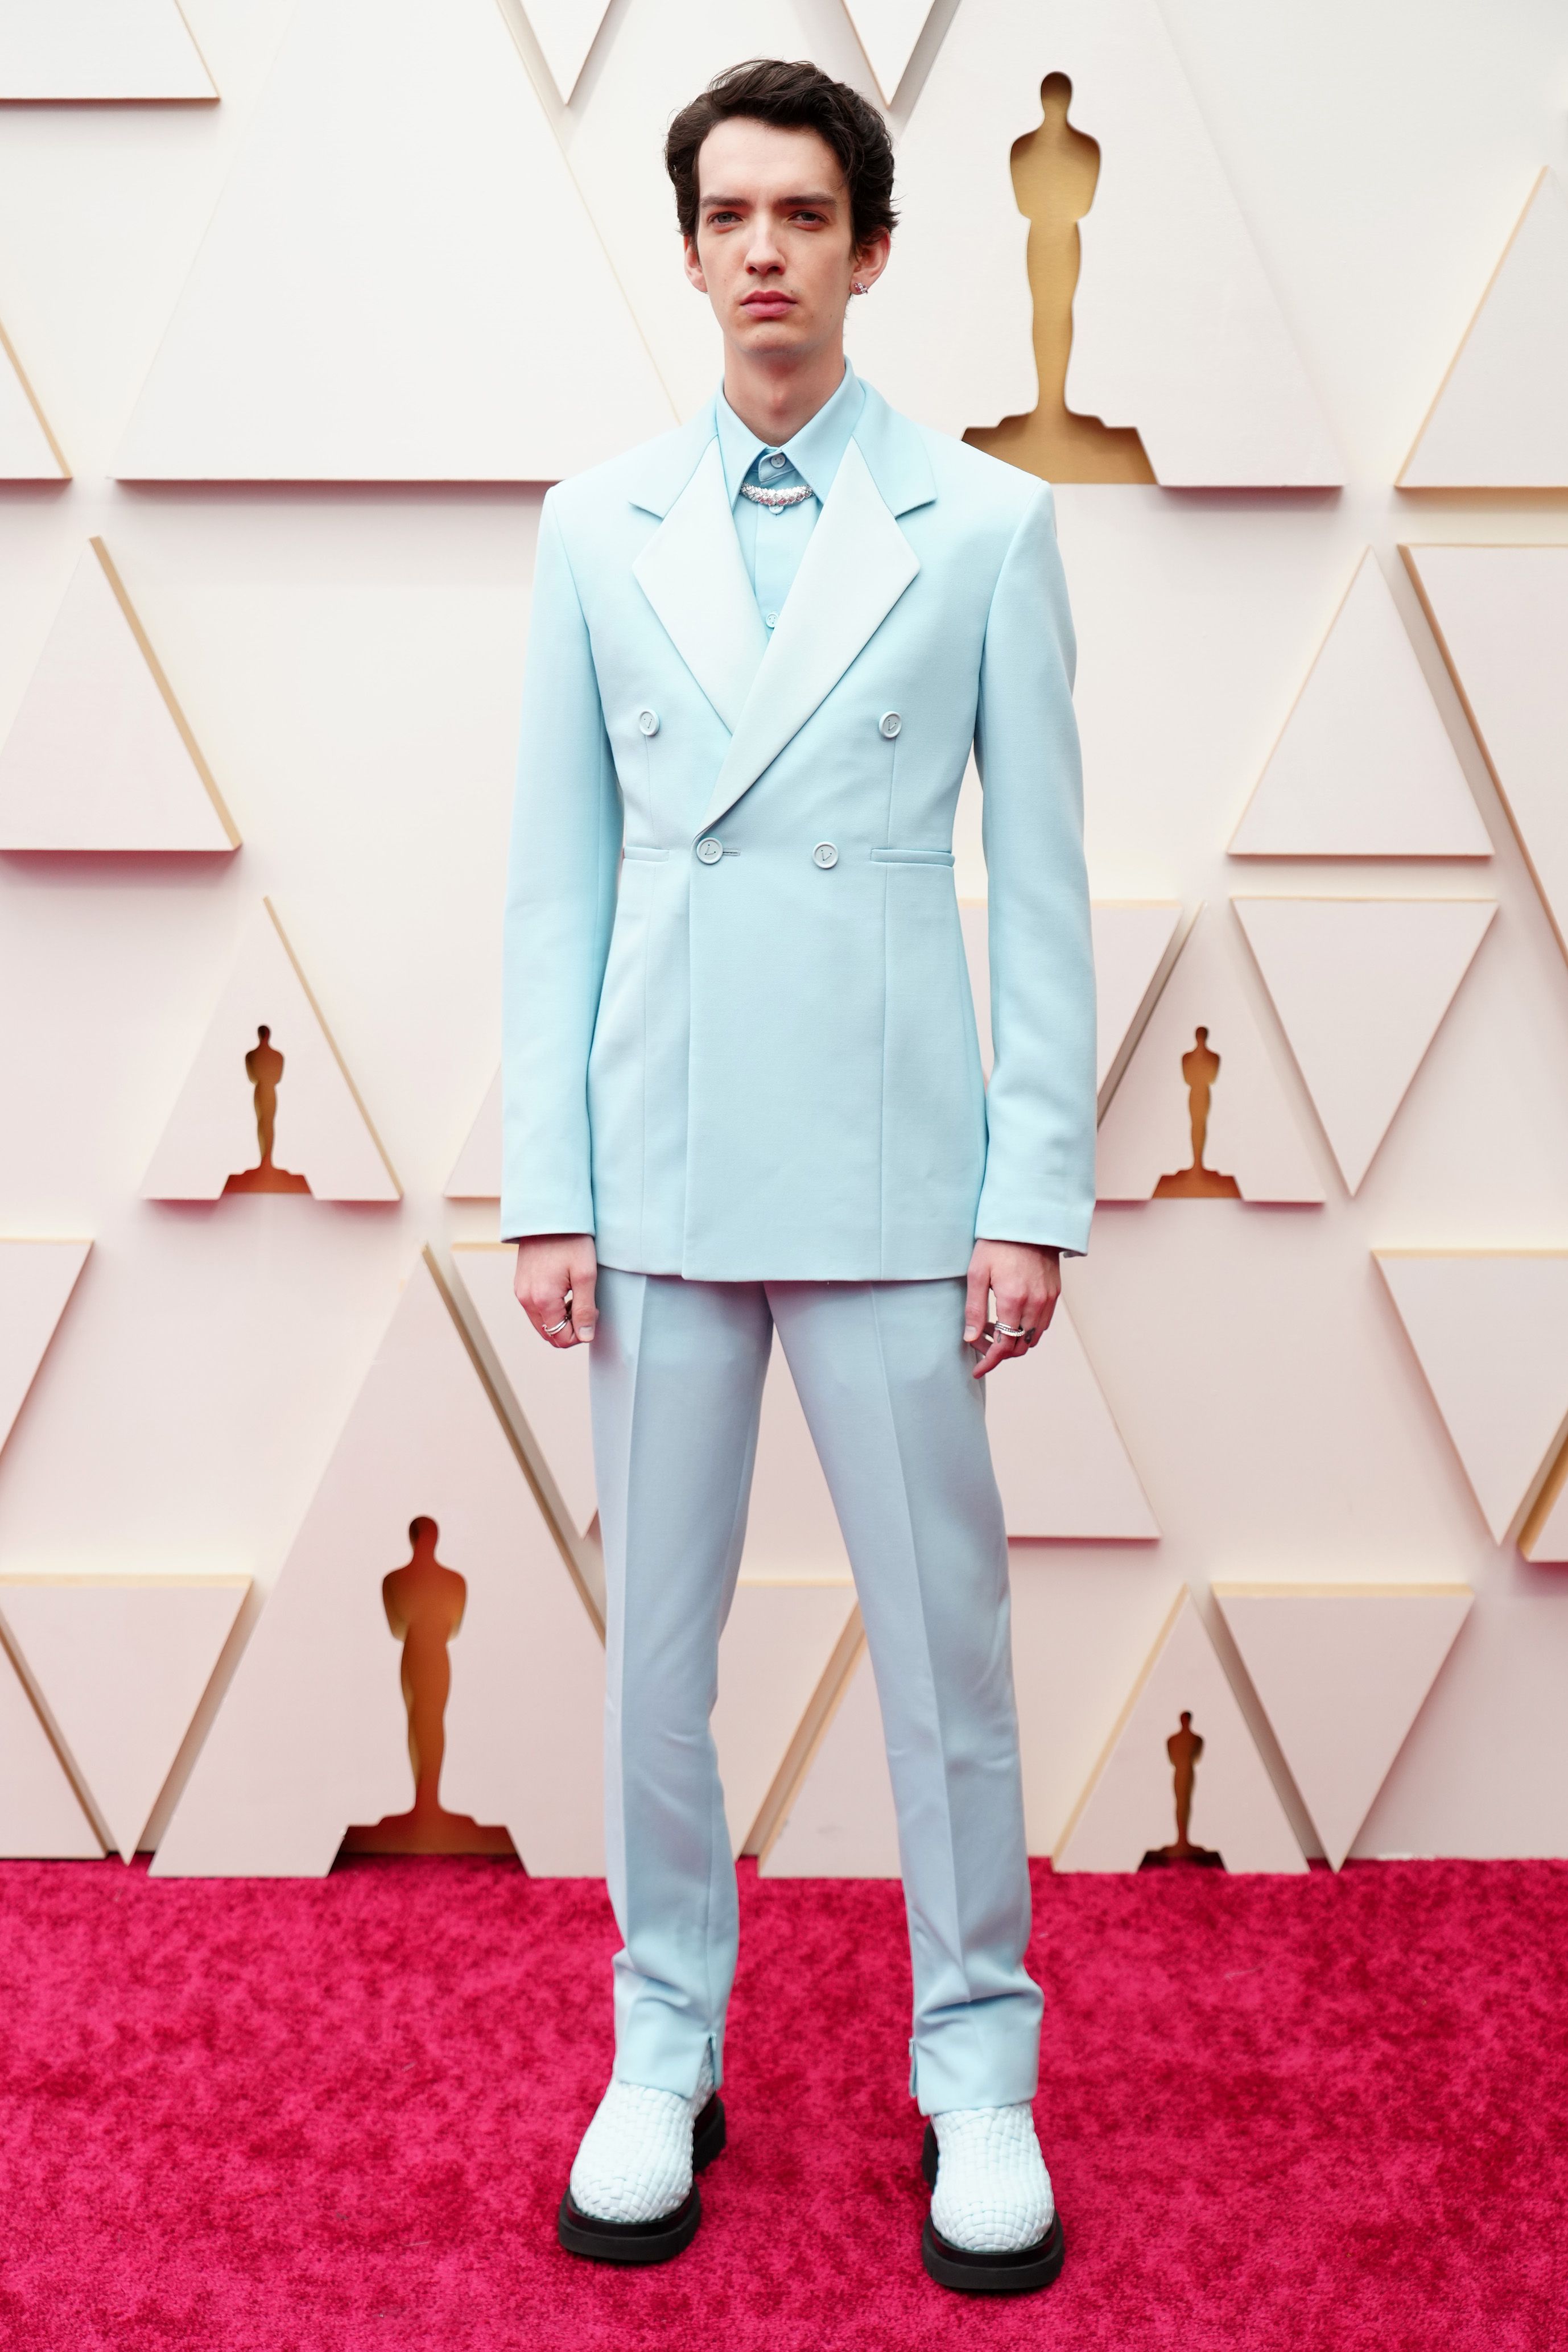 And the Oscar of Fashion Goes To: Menswear